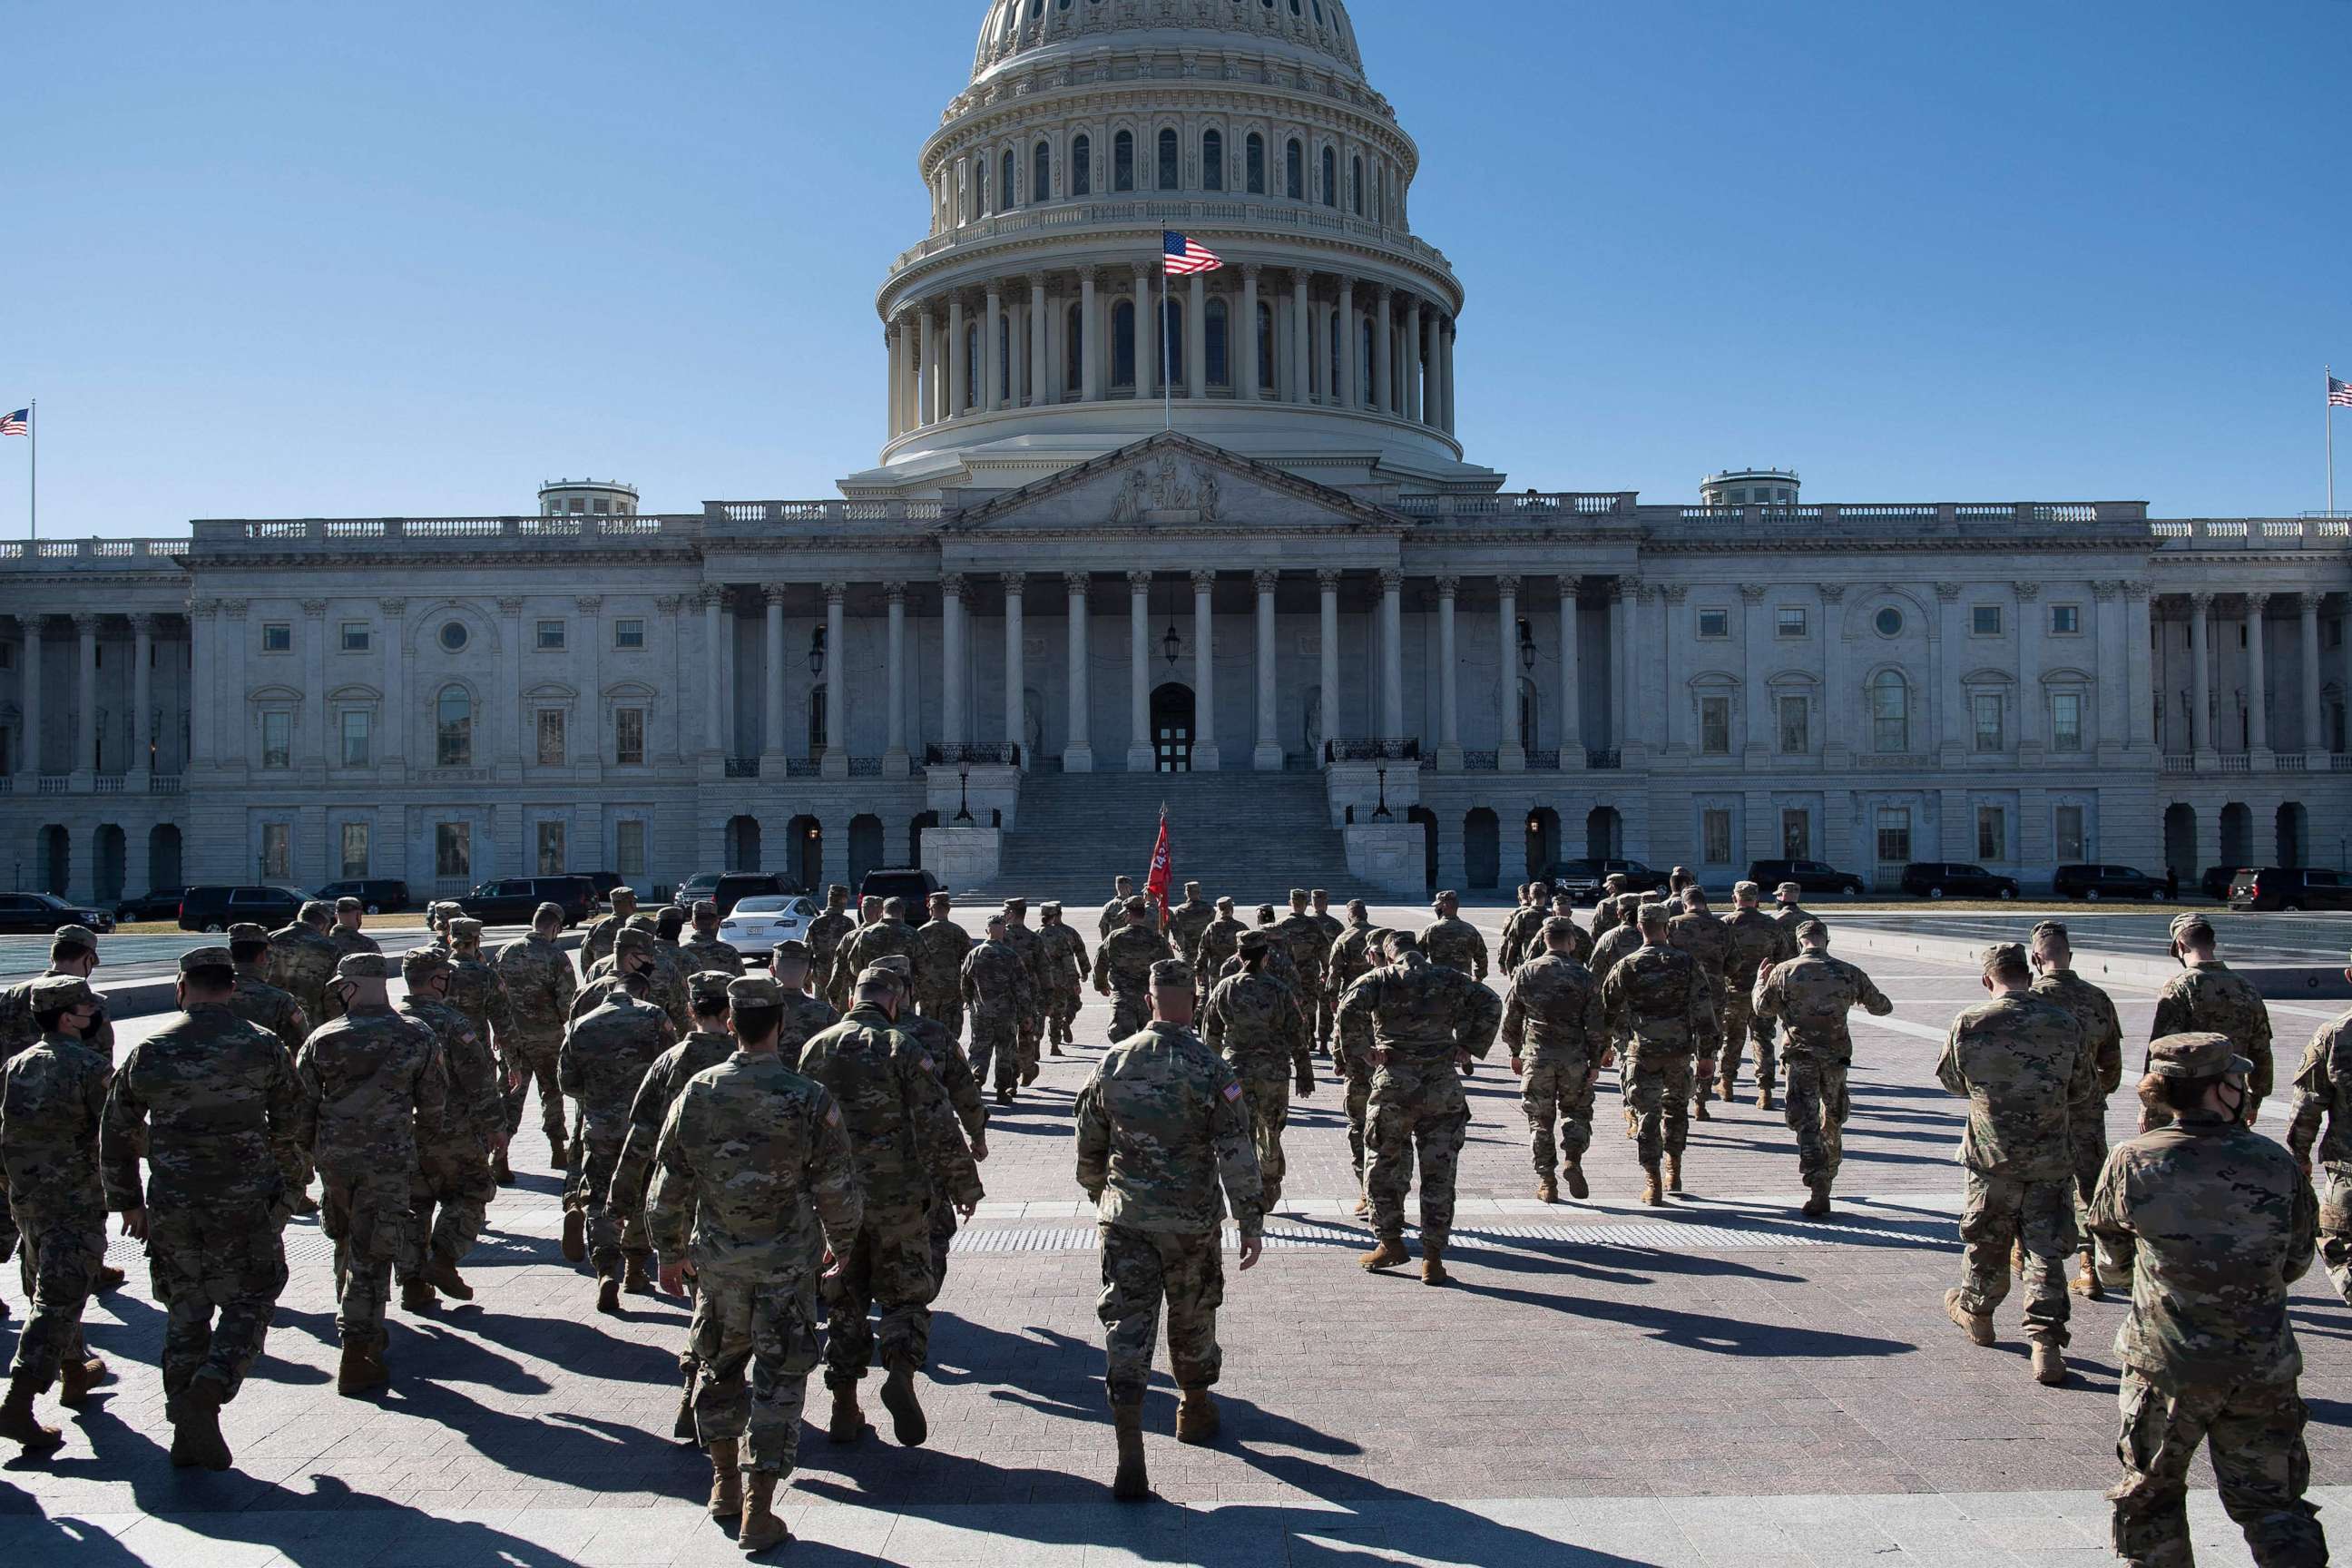 PHOTO: Members of the National Guard are seen on the east front of the U.S. Capitol building on Capitol Hill in Washington, D.C., on March 2, 2021.